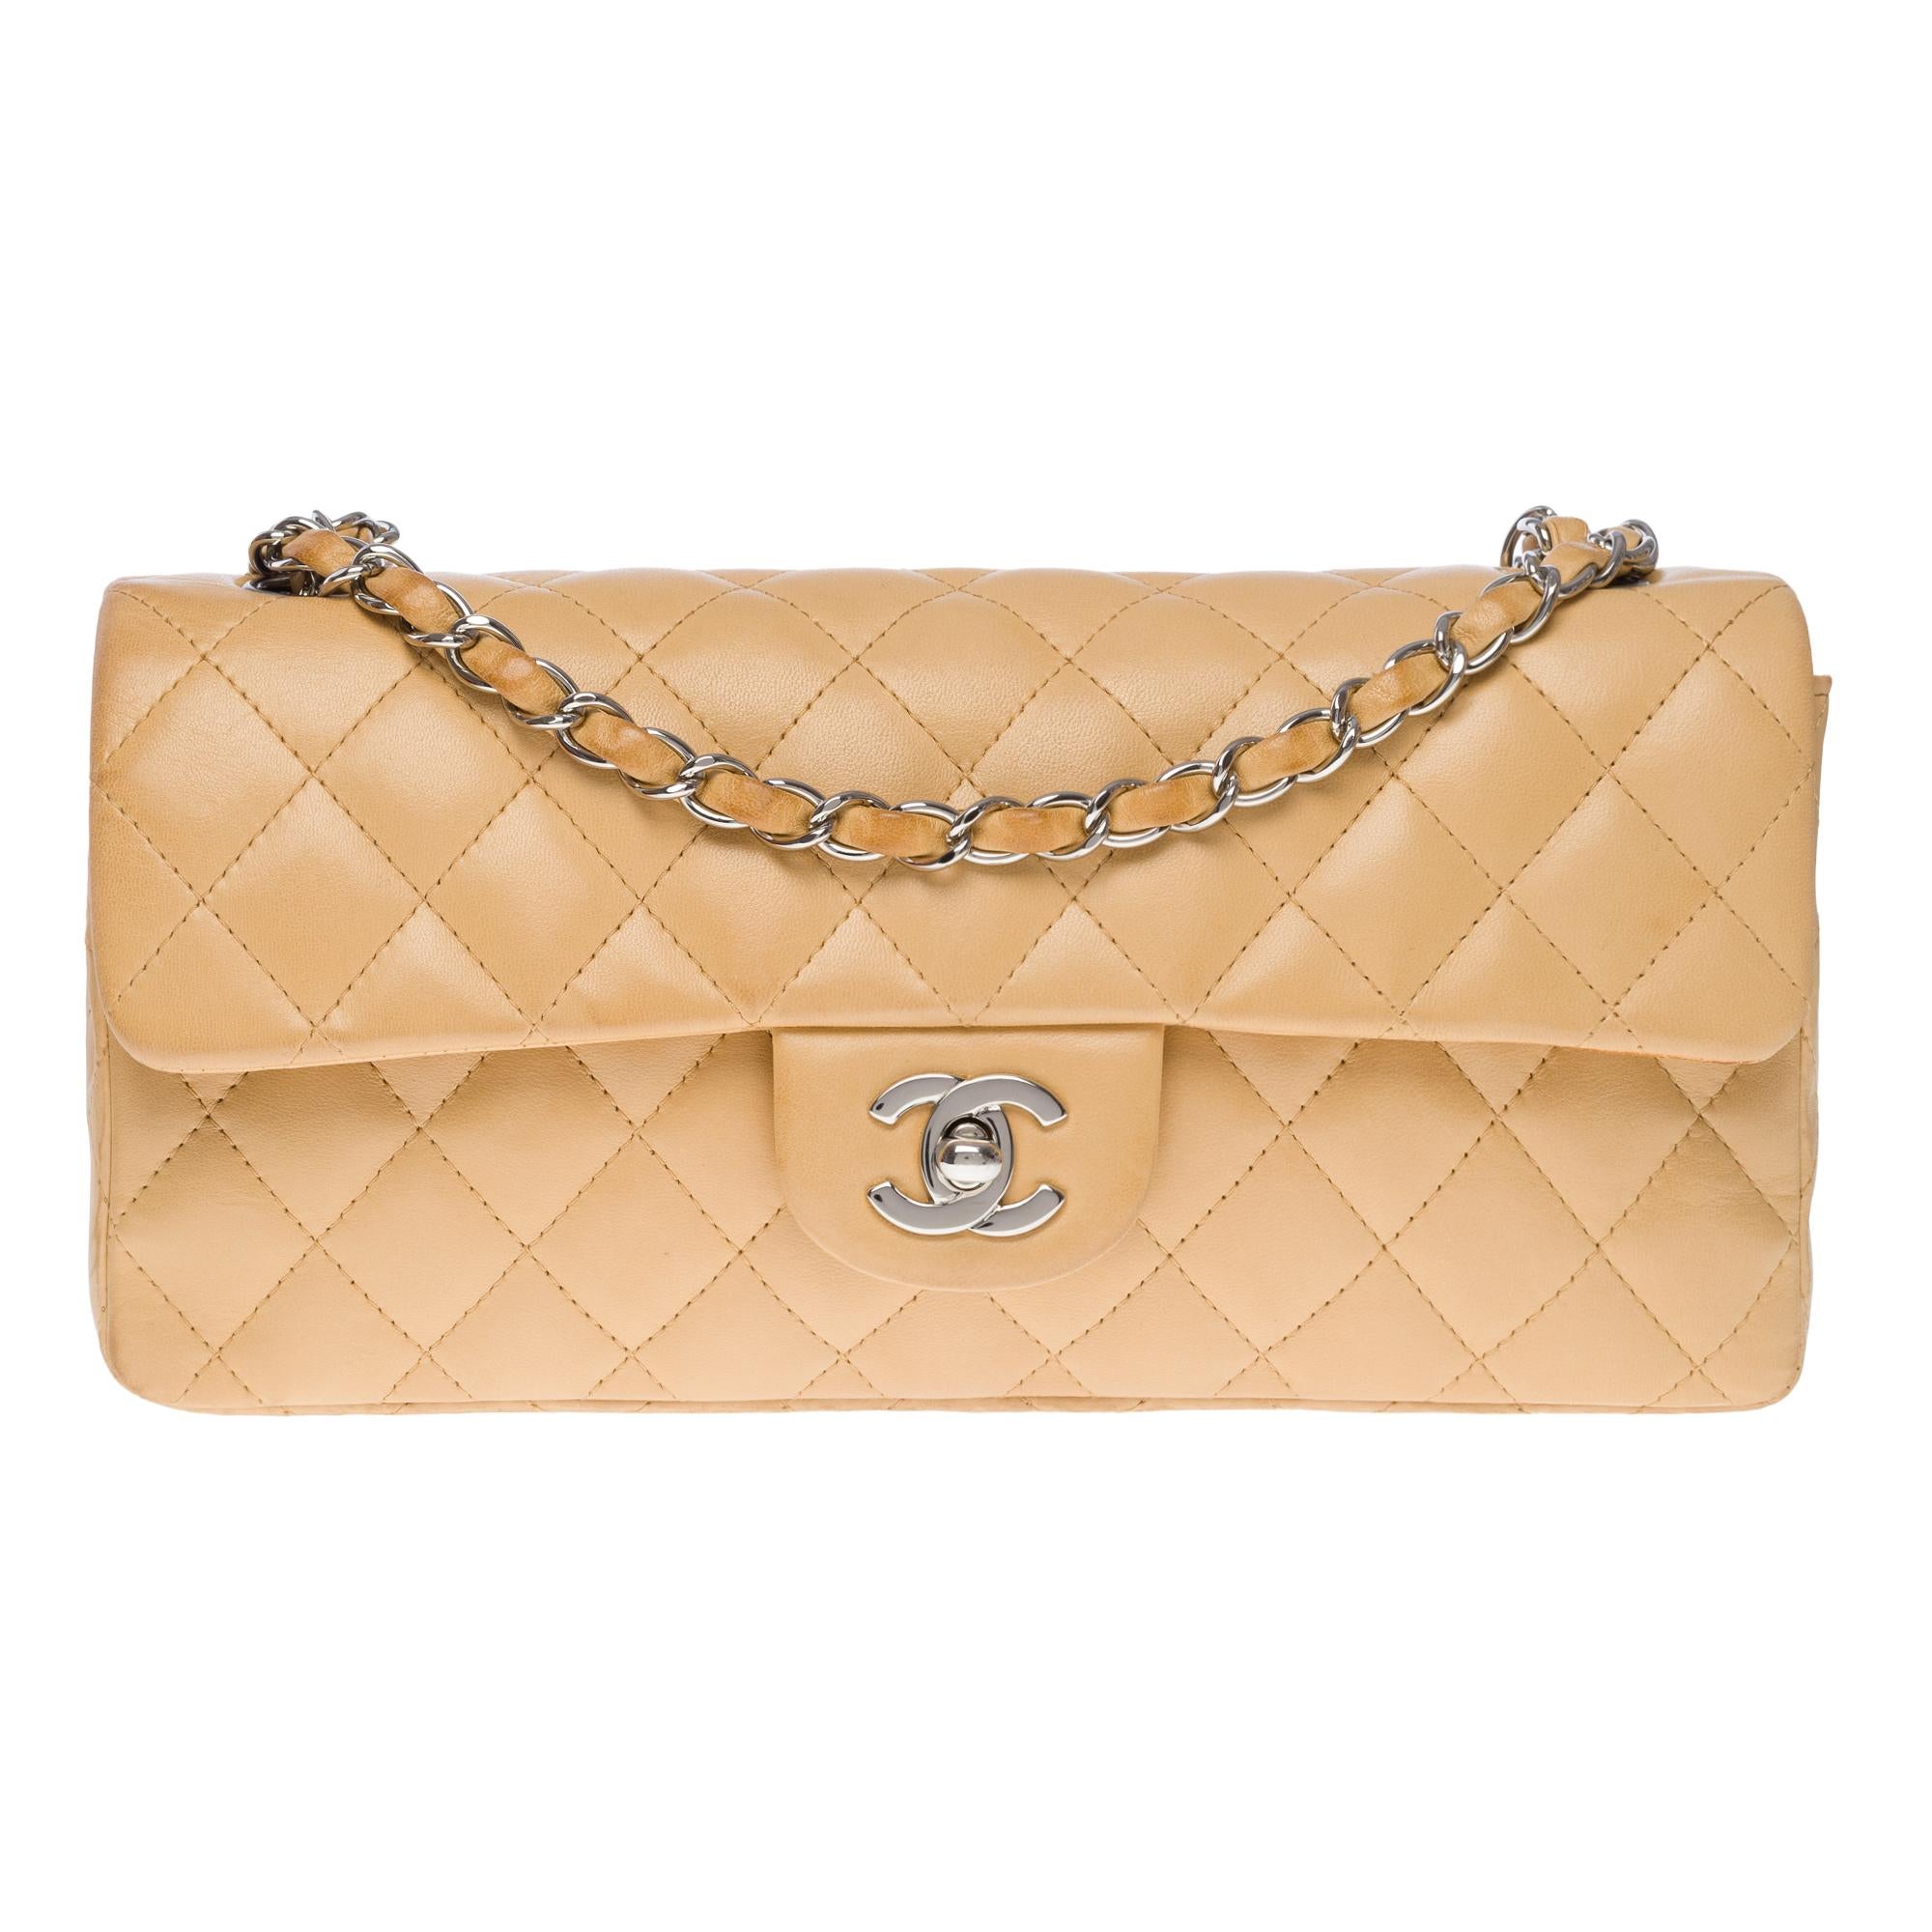 Gorgeous Chanel Baguette shoulder flap bag in beige quilted lambskin leather, silver metal hardware, silver metal chain interlaced with beige leather for a hand or shoulder carry

Flap closure, CC logo clasp in silver metal
Single flap
Beige leather